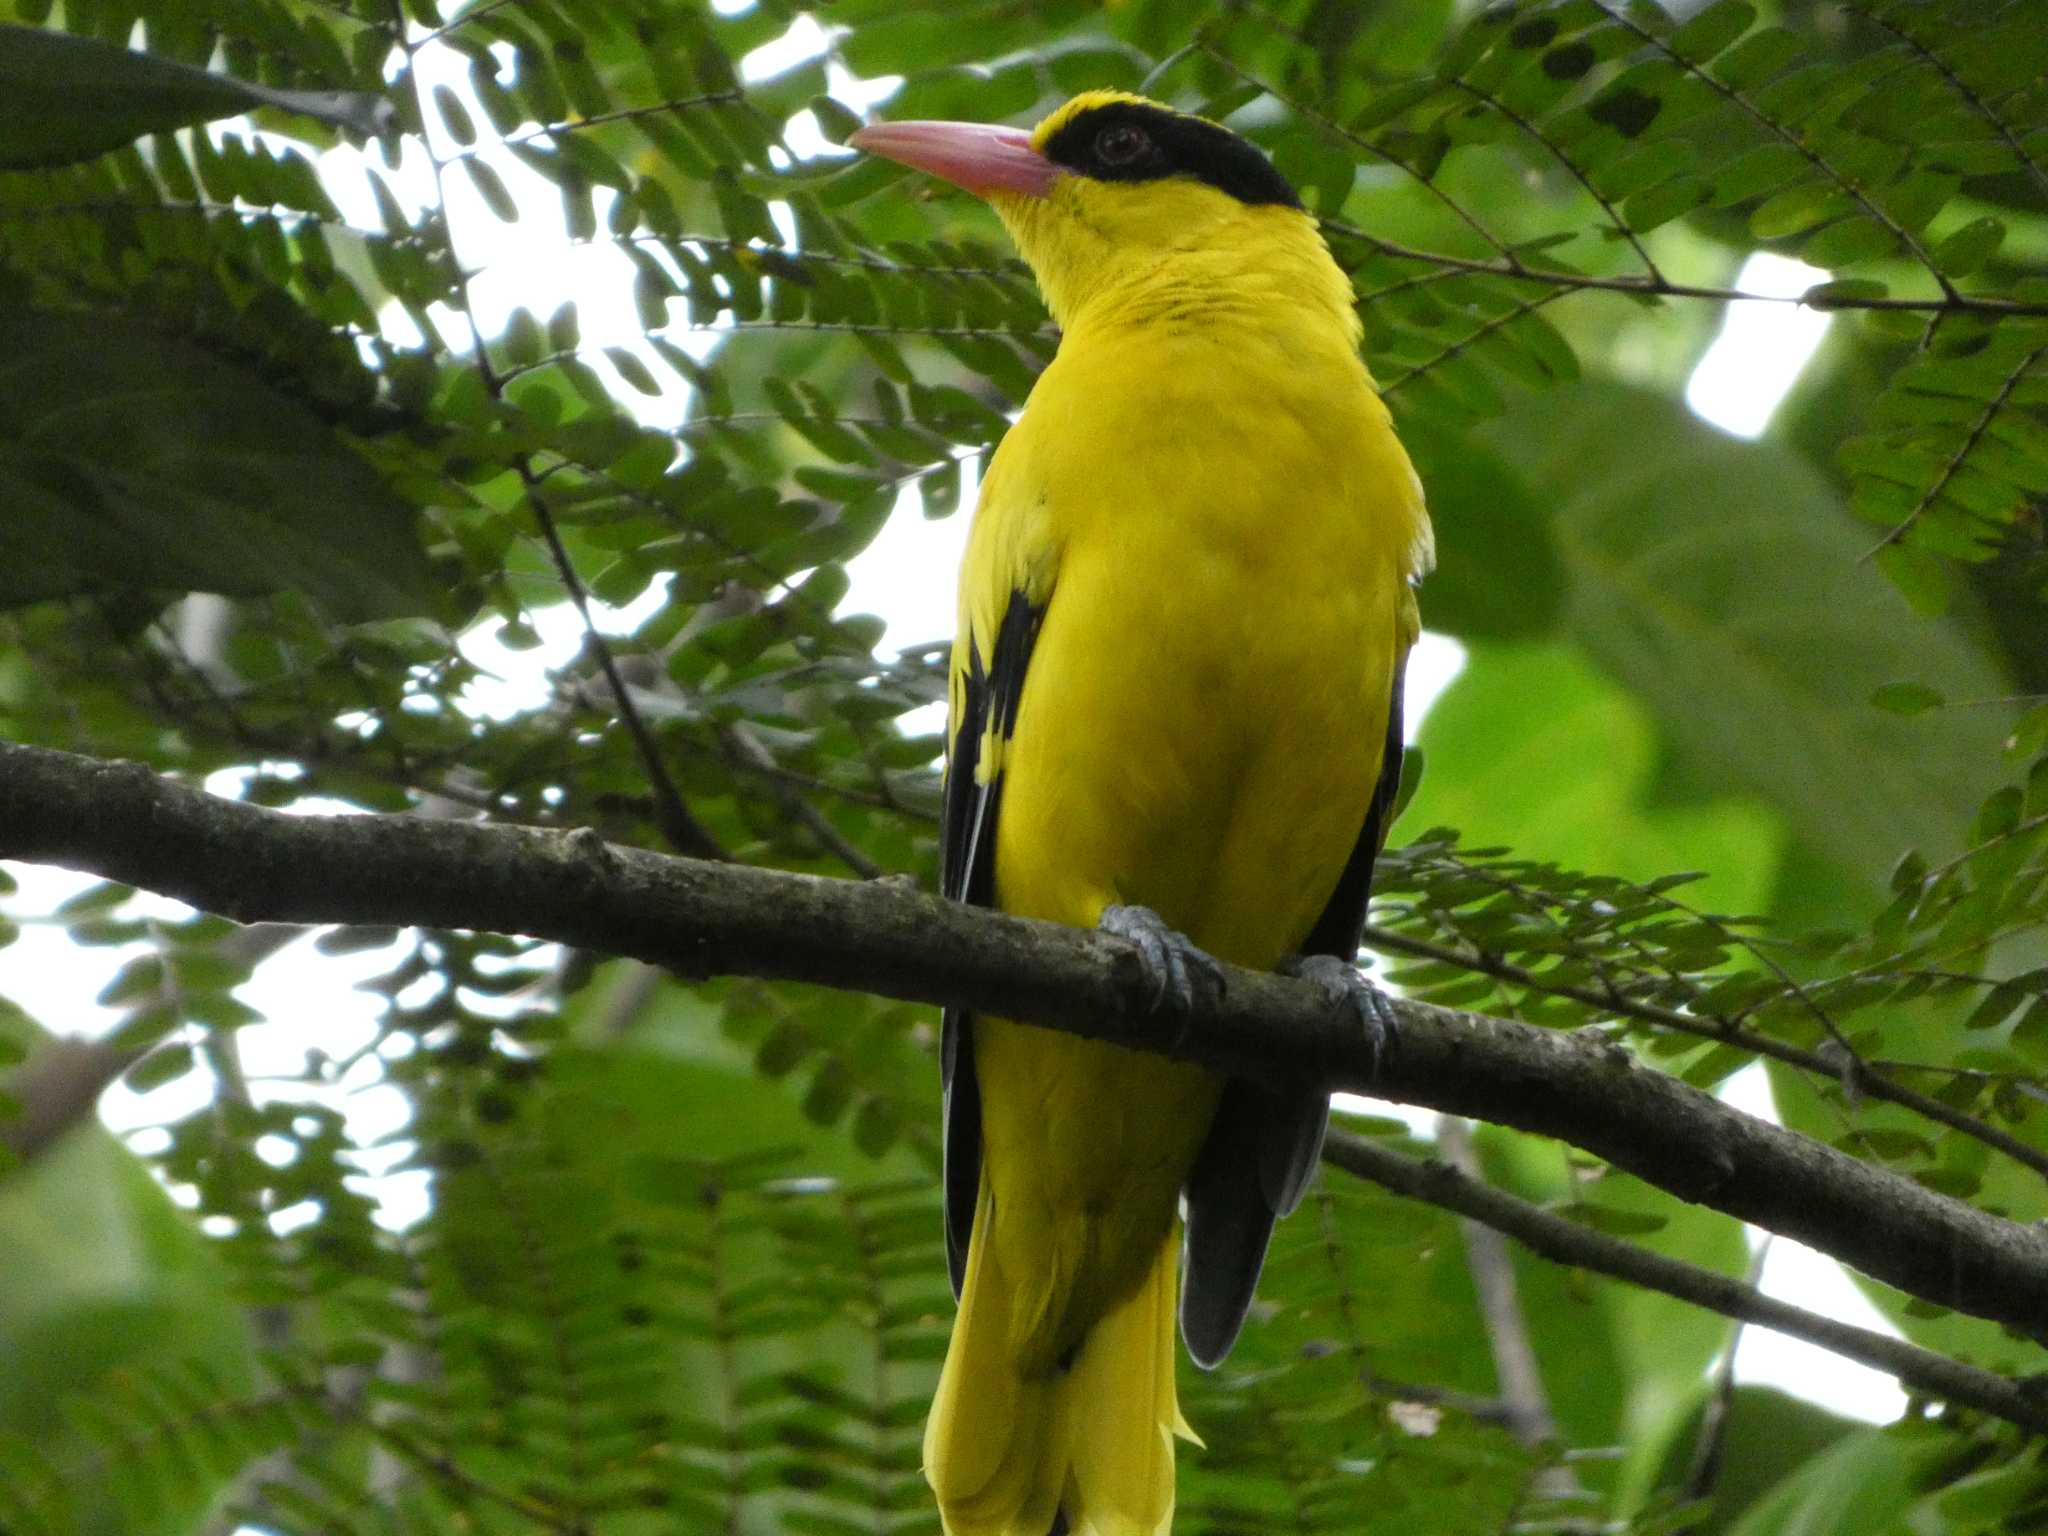 Photo of Black-naped Oriole at マレーシア by このはずく